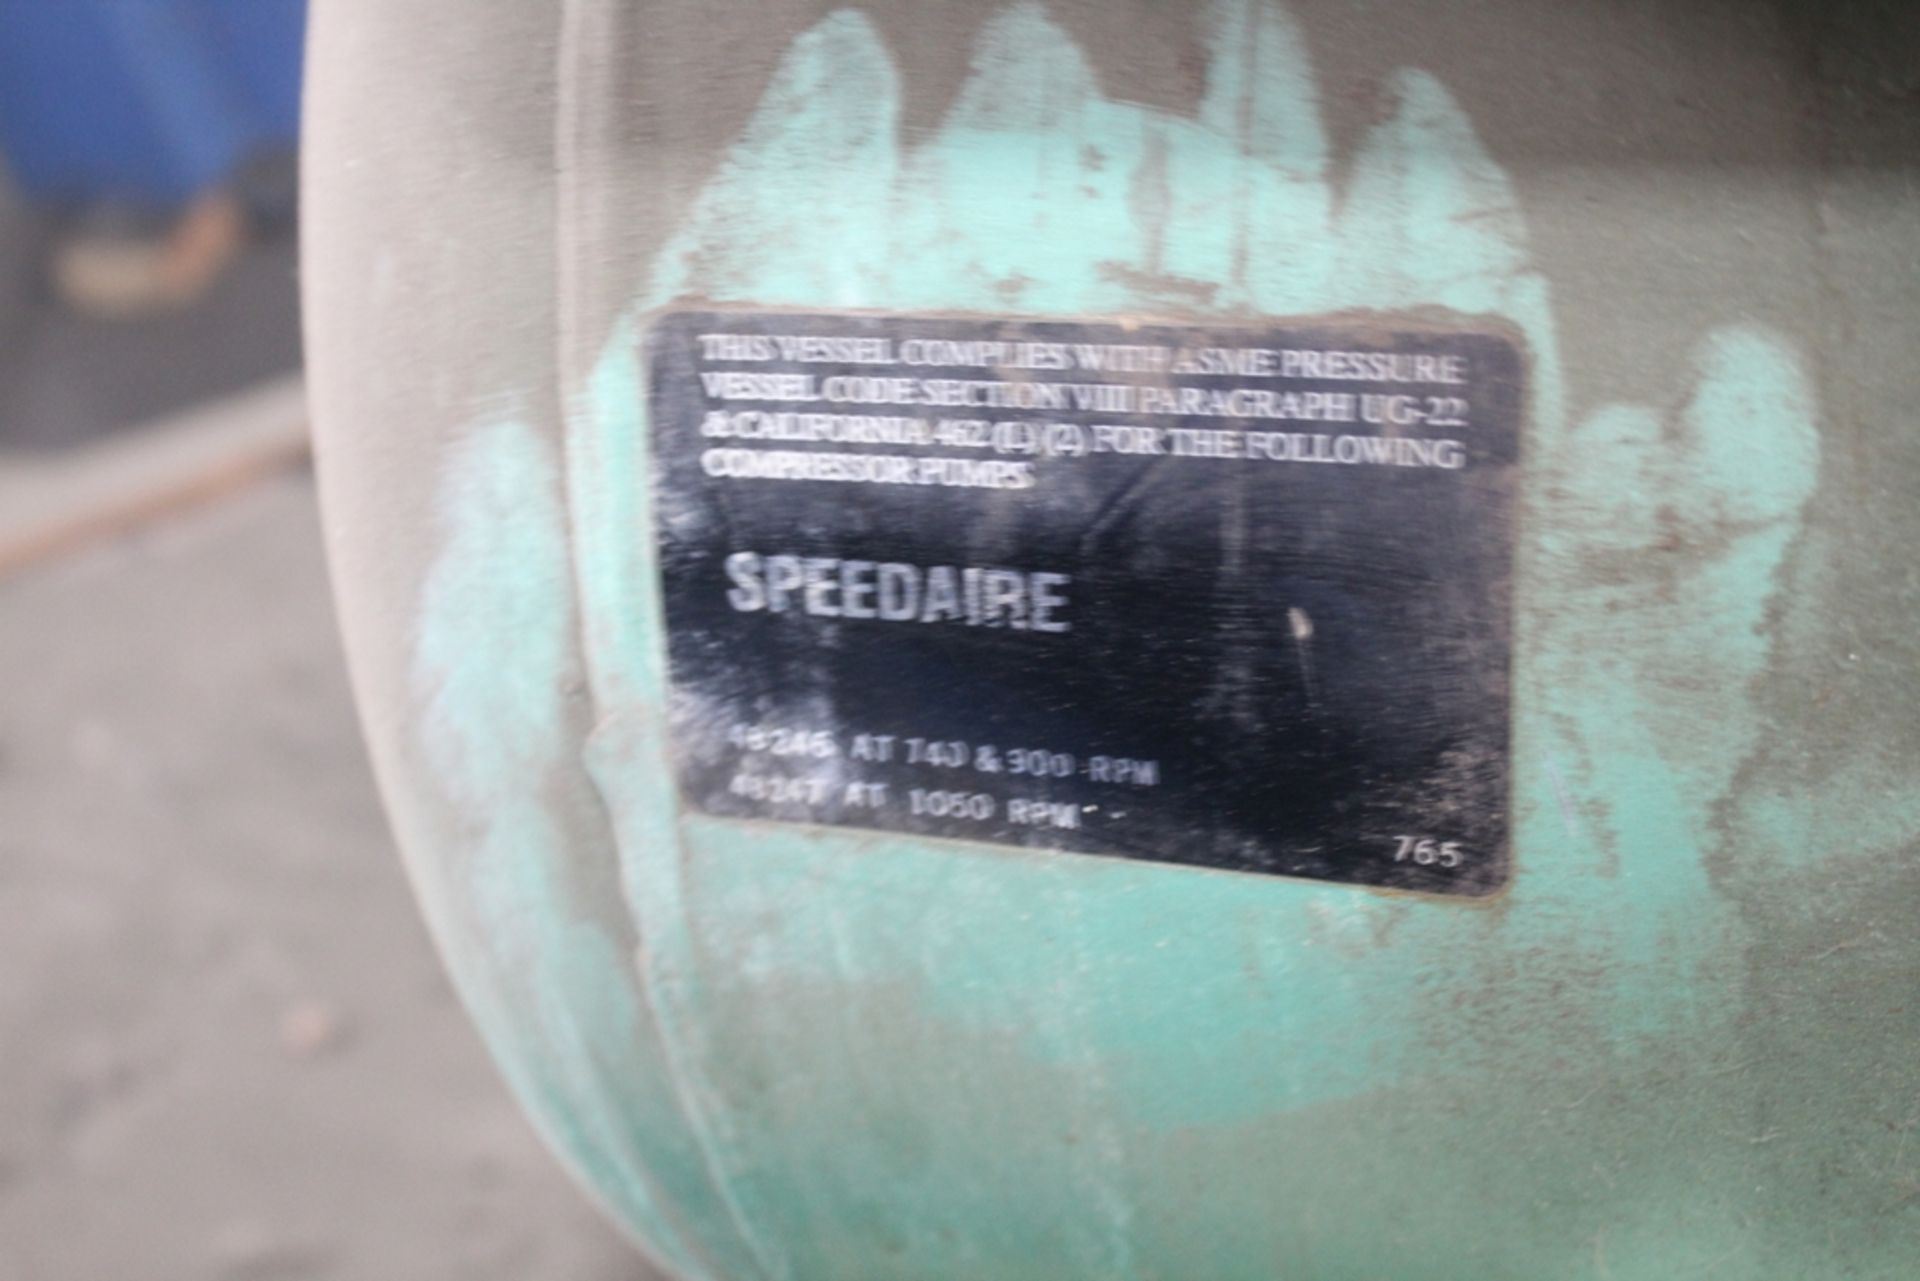 SPEEDAIRE 3 HP TANK MOUNTED AIR COMPRESSOR, S/N L7/21/97-01004 - Image 2 of 2